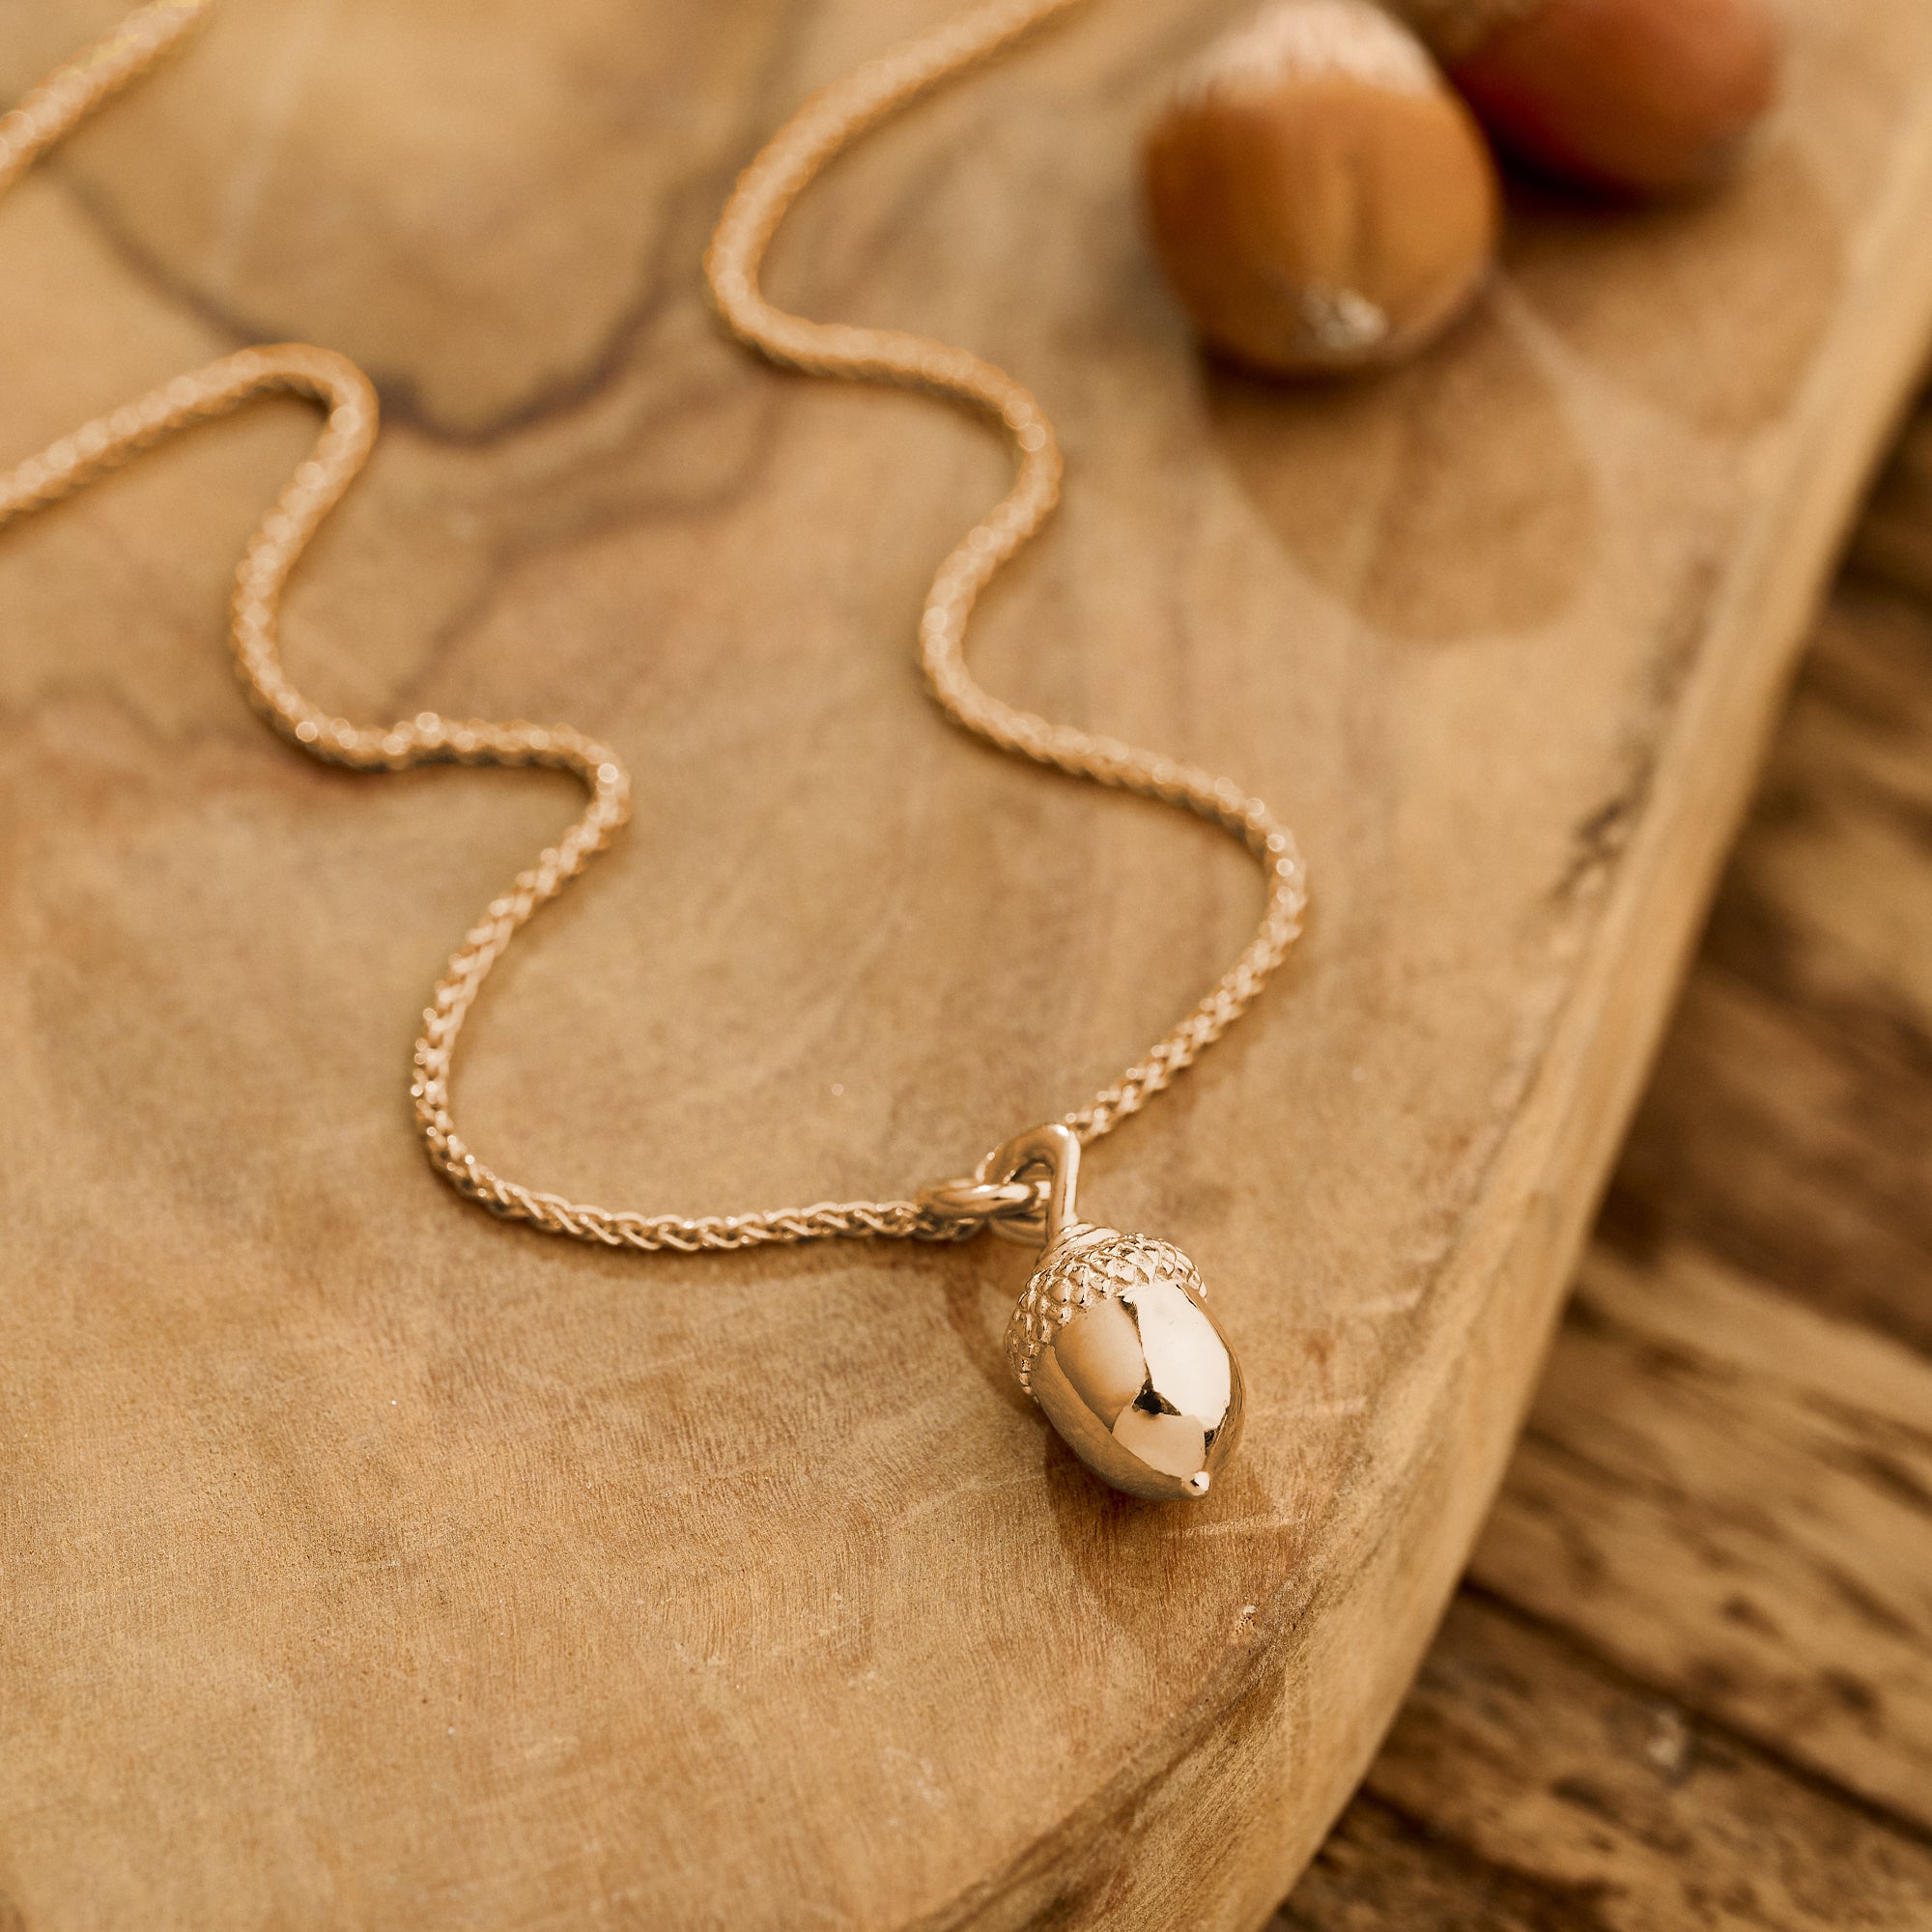 Charming Rose Gold Acorn Necklace - Scarlett Jewellery Collection